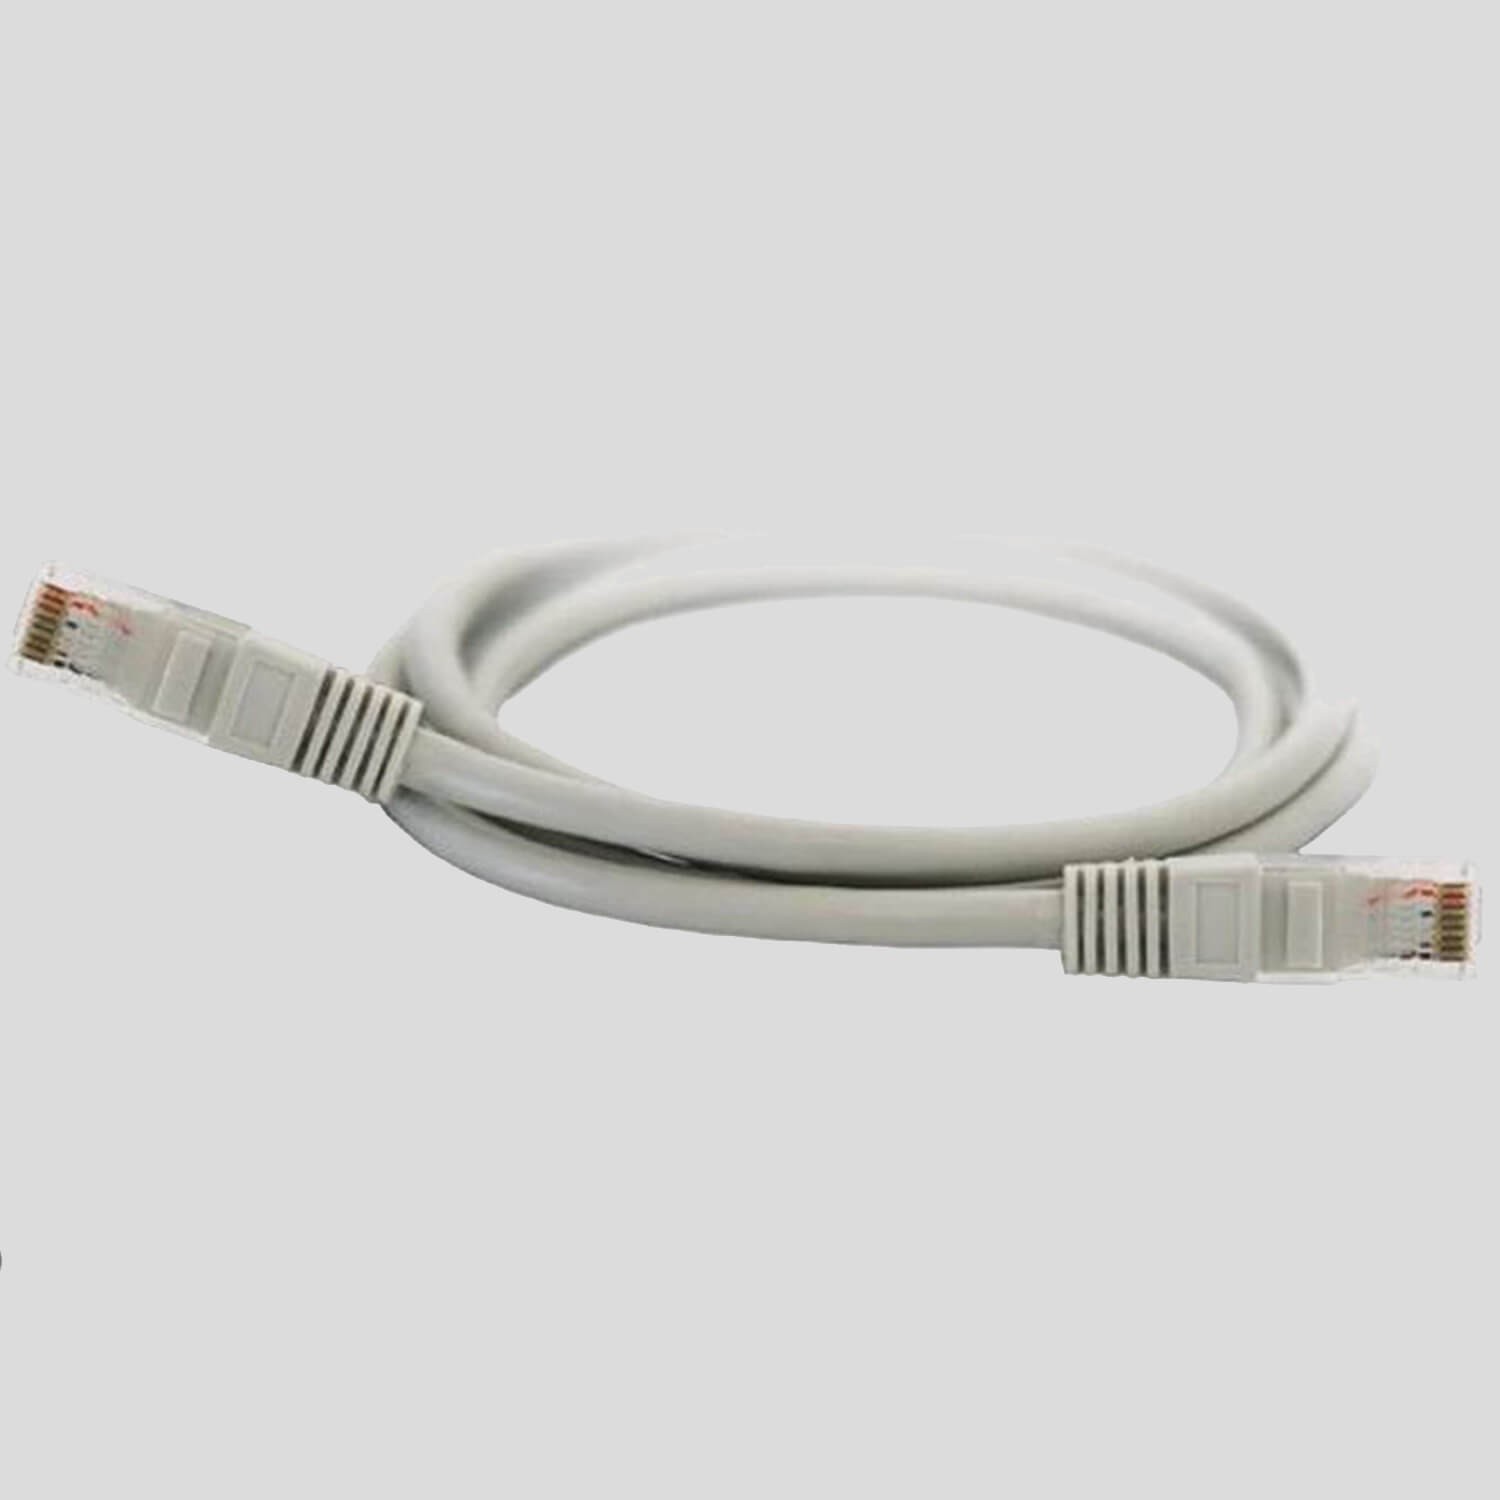 COMMUNICATION CABLE